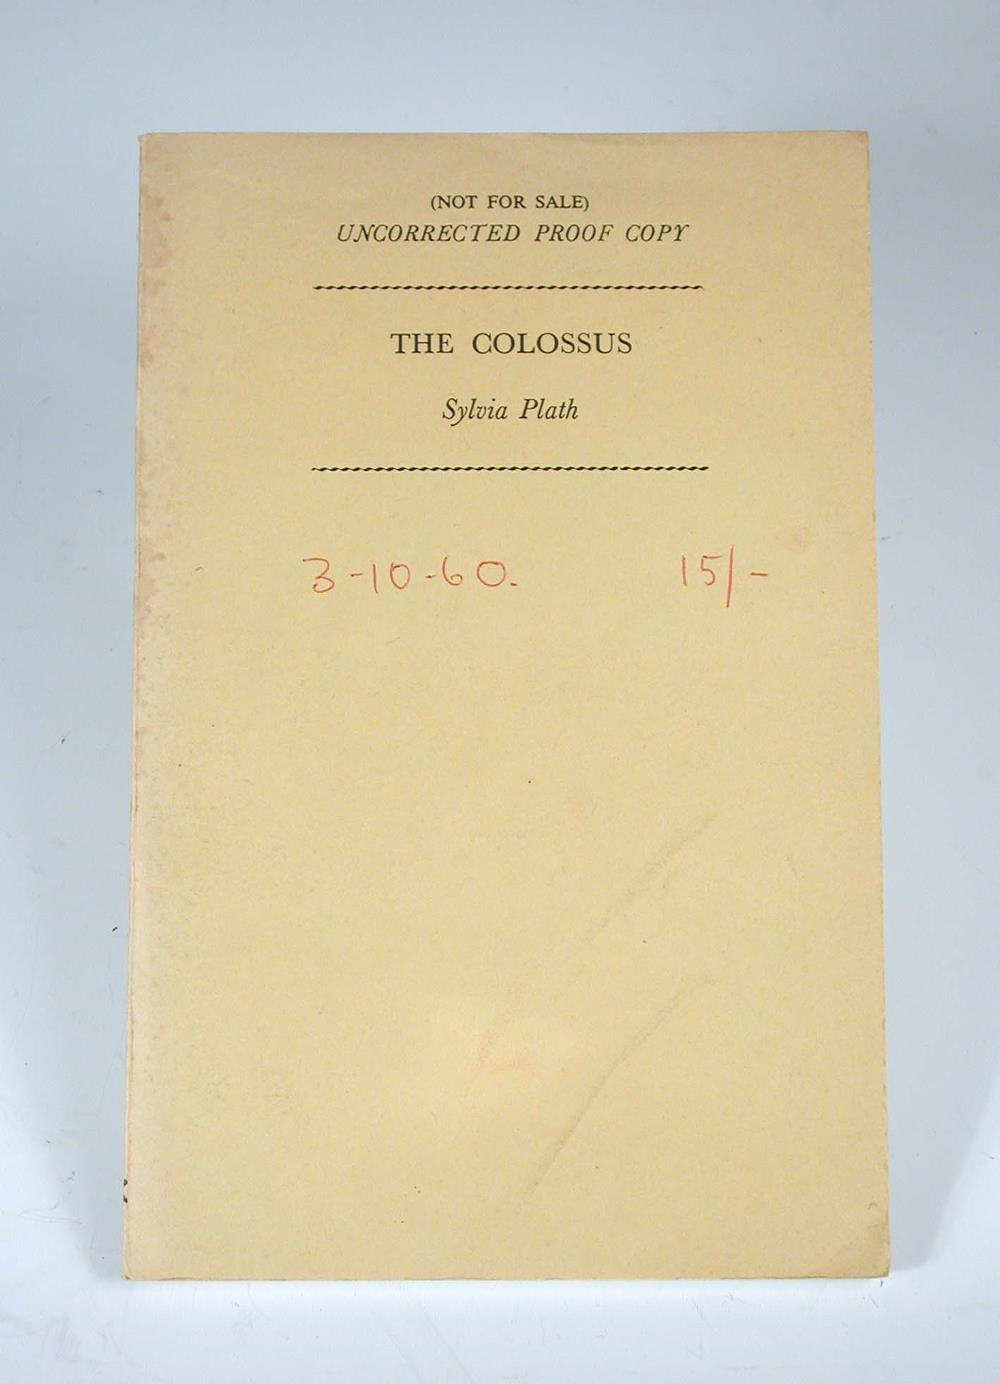 PLATH (Sylvia) The Colossus, Heinemann 1960, uncorrected proof copy, original yellow paper wrapper